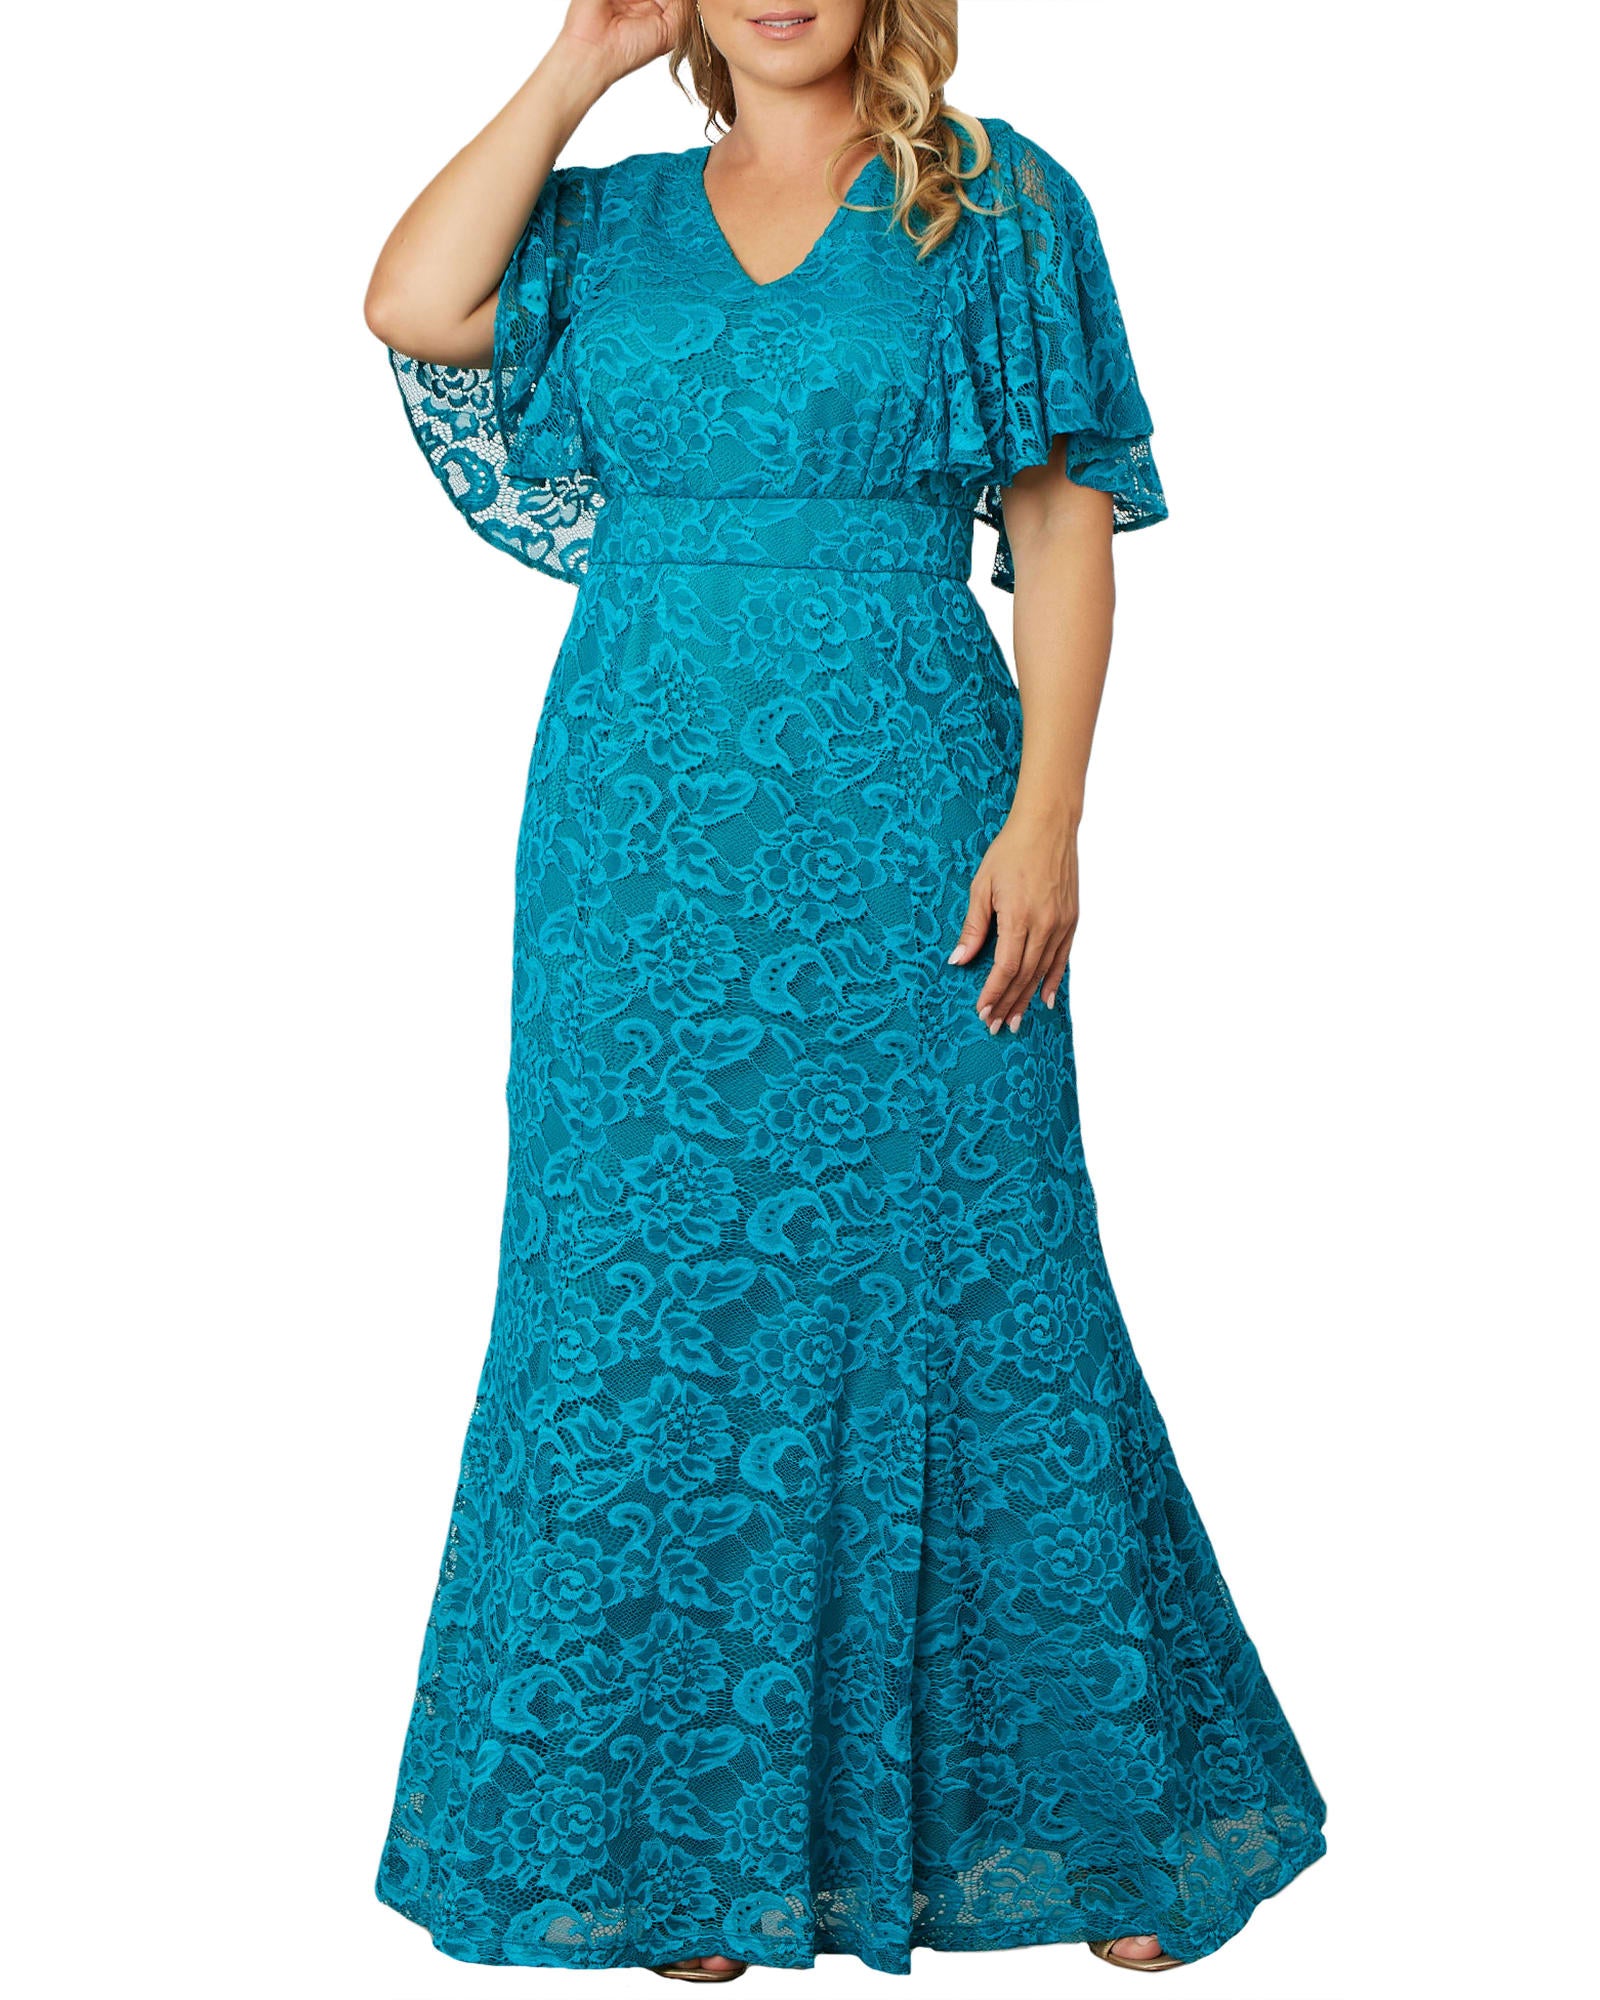 Duchess Lace Evening Gown | TEAL TOPAZ